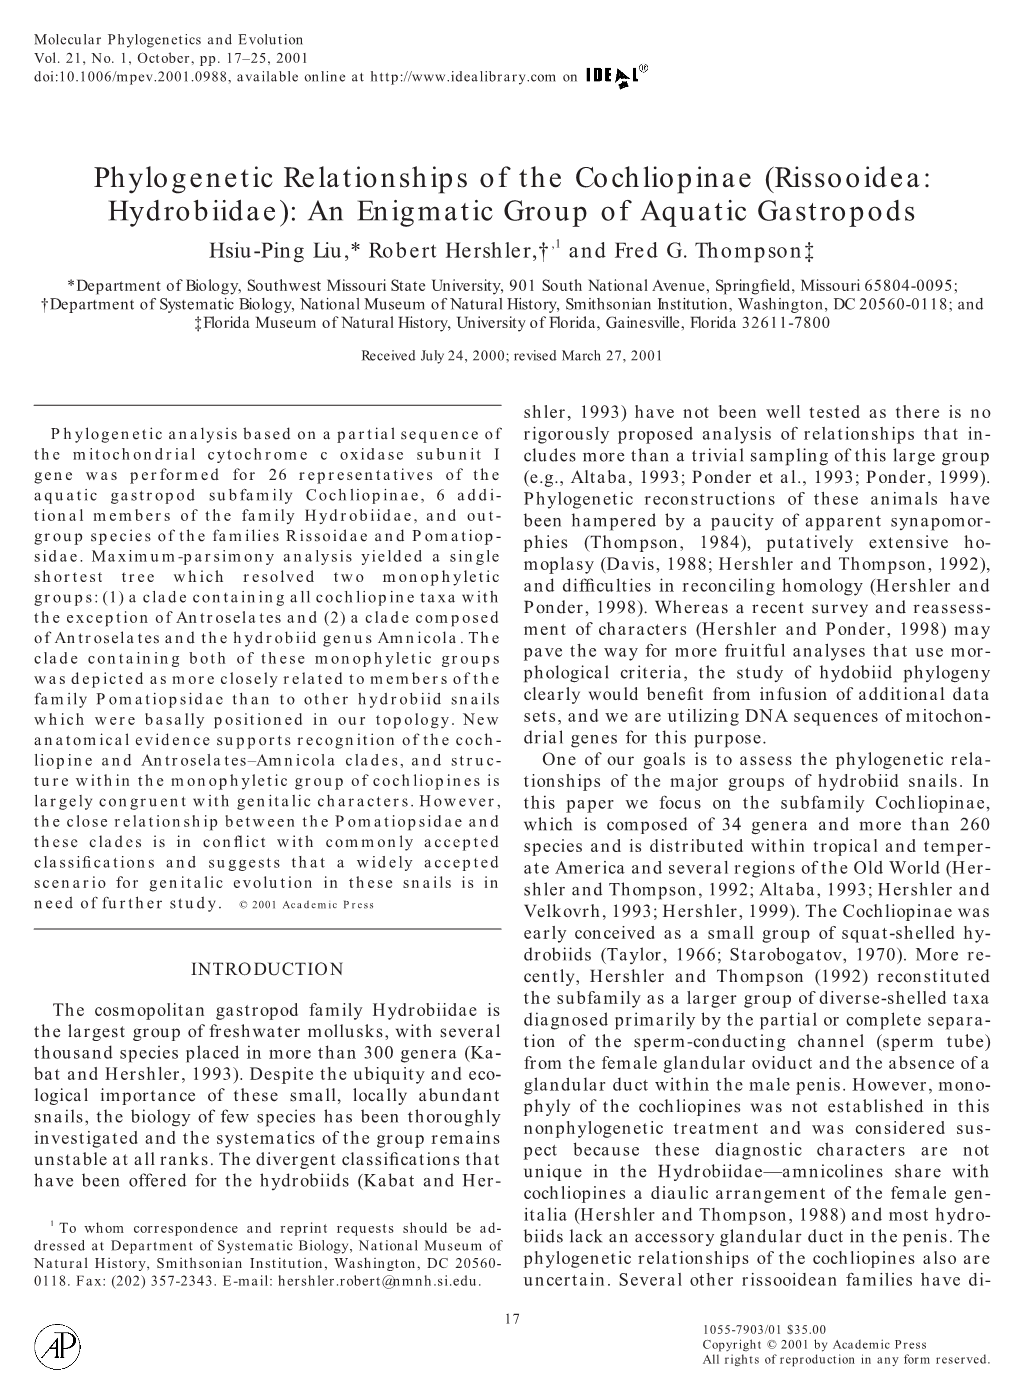 Phylogenetic Relationships of the Cochliopinae (Rissooidea: Hydrobiidae): an Enigmatic Group of Aquatic Gastropods Hsiu-Ping Liu,* Robert Hershler,†,1 and Fred G